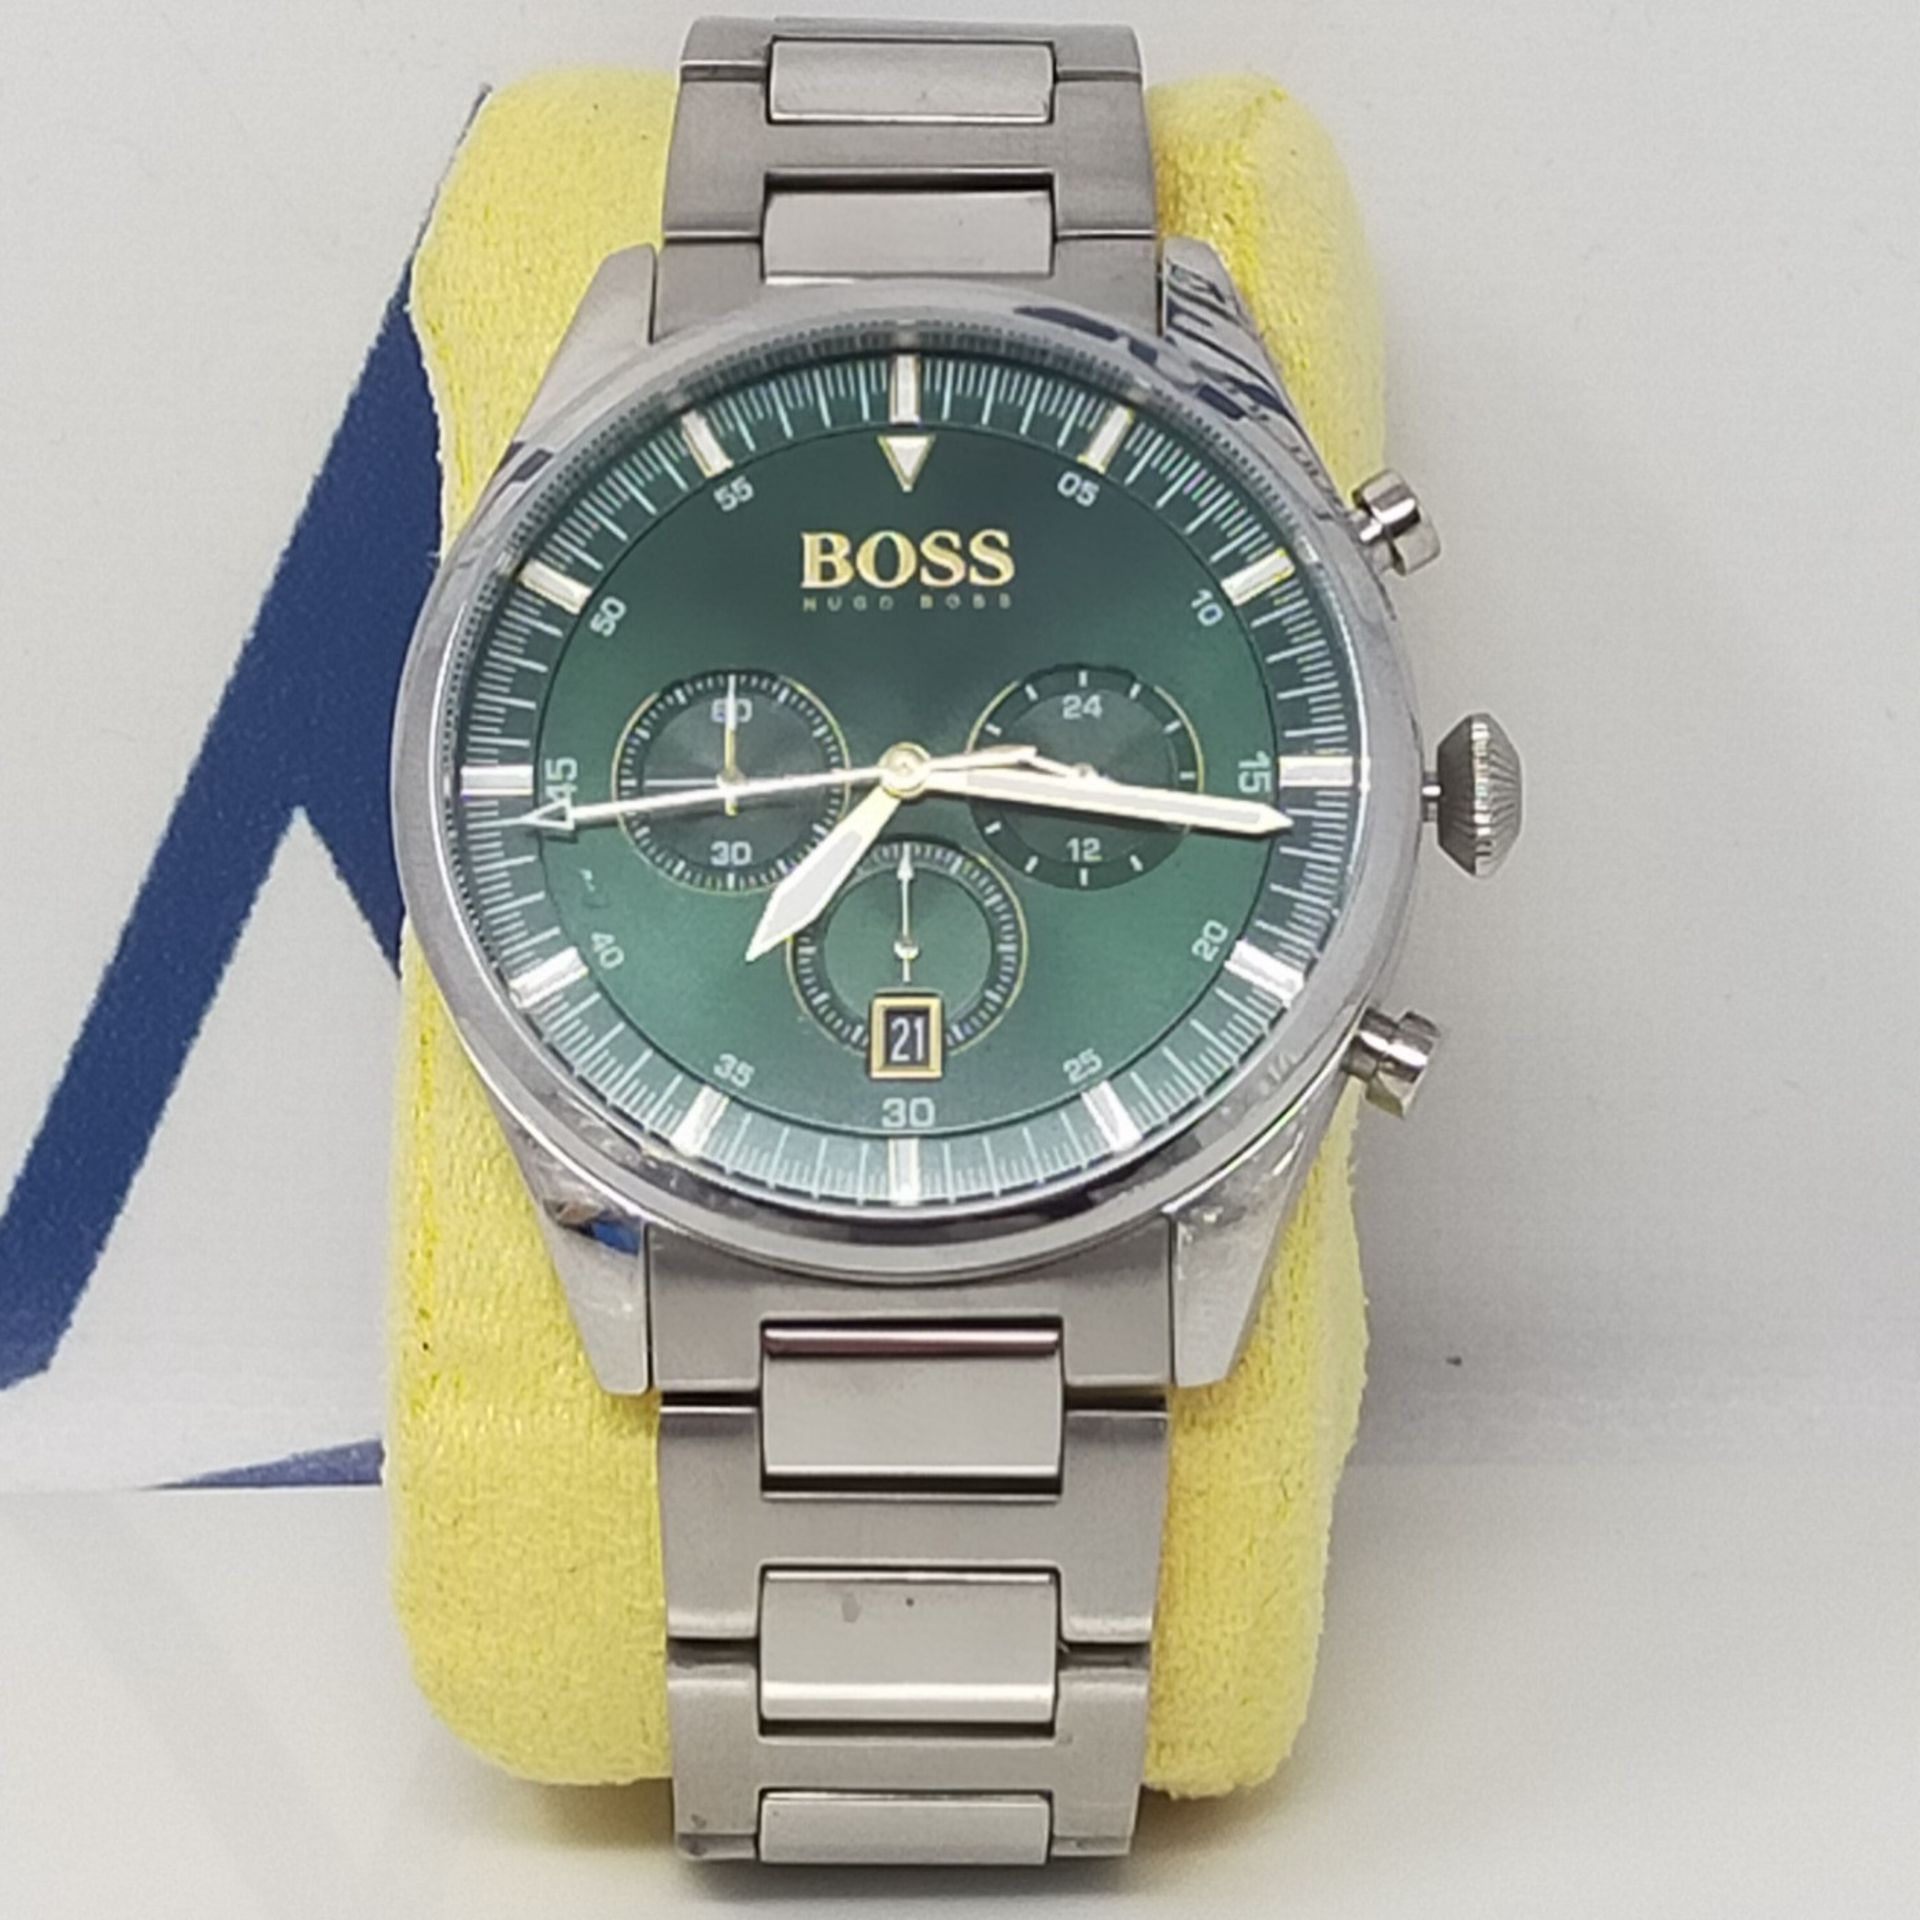 RRP £273.00 BOSS Men's Analog Quartz Watch with Stainless Steel Strap 1513868 - Image 3 of 3